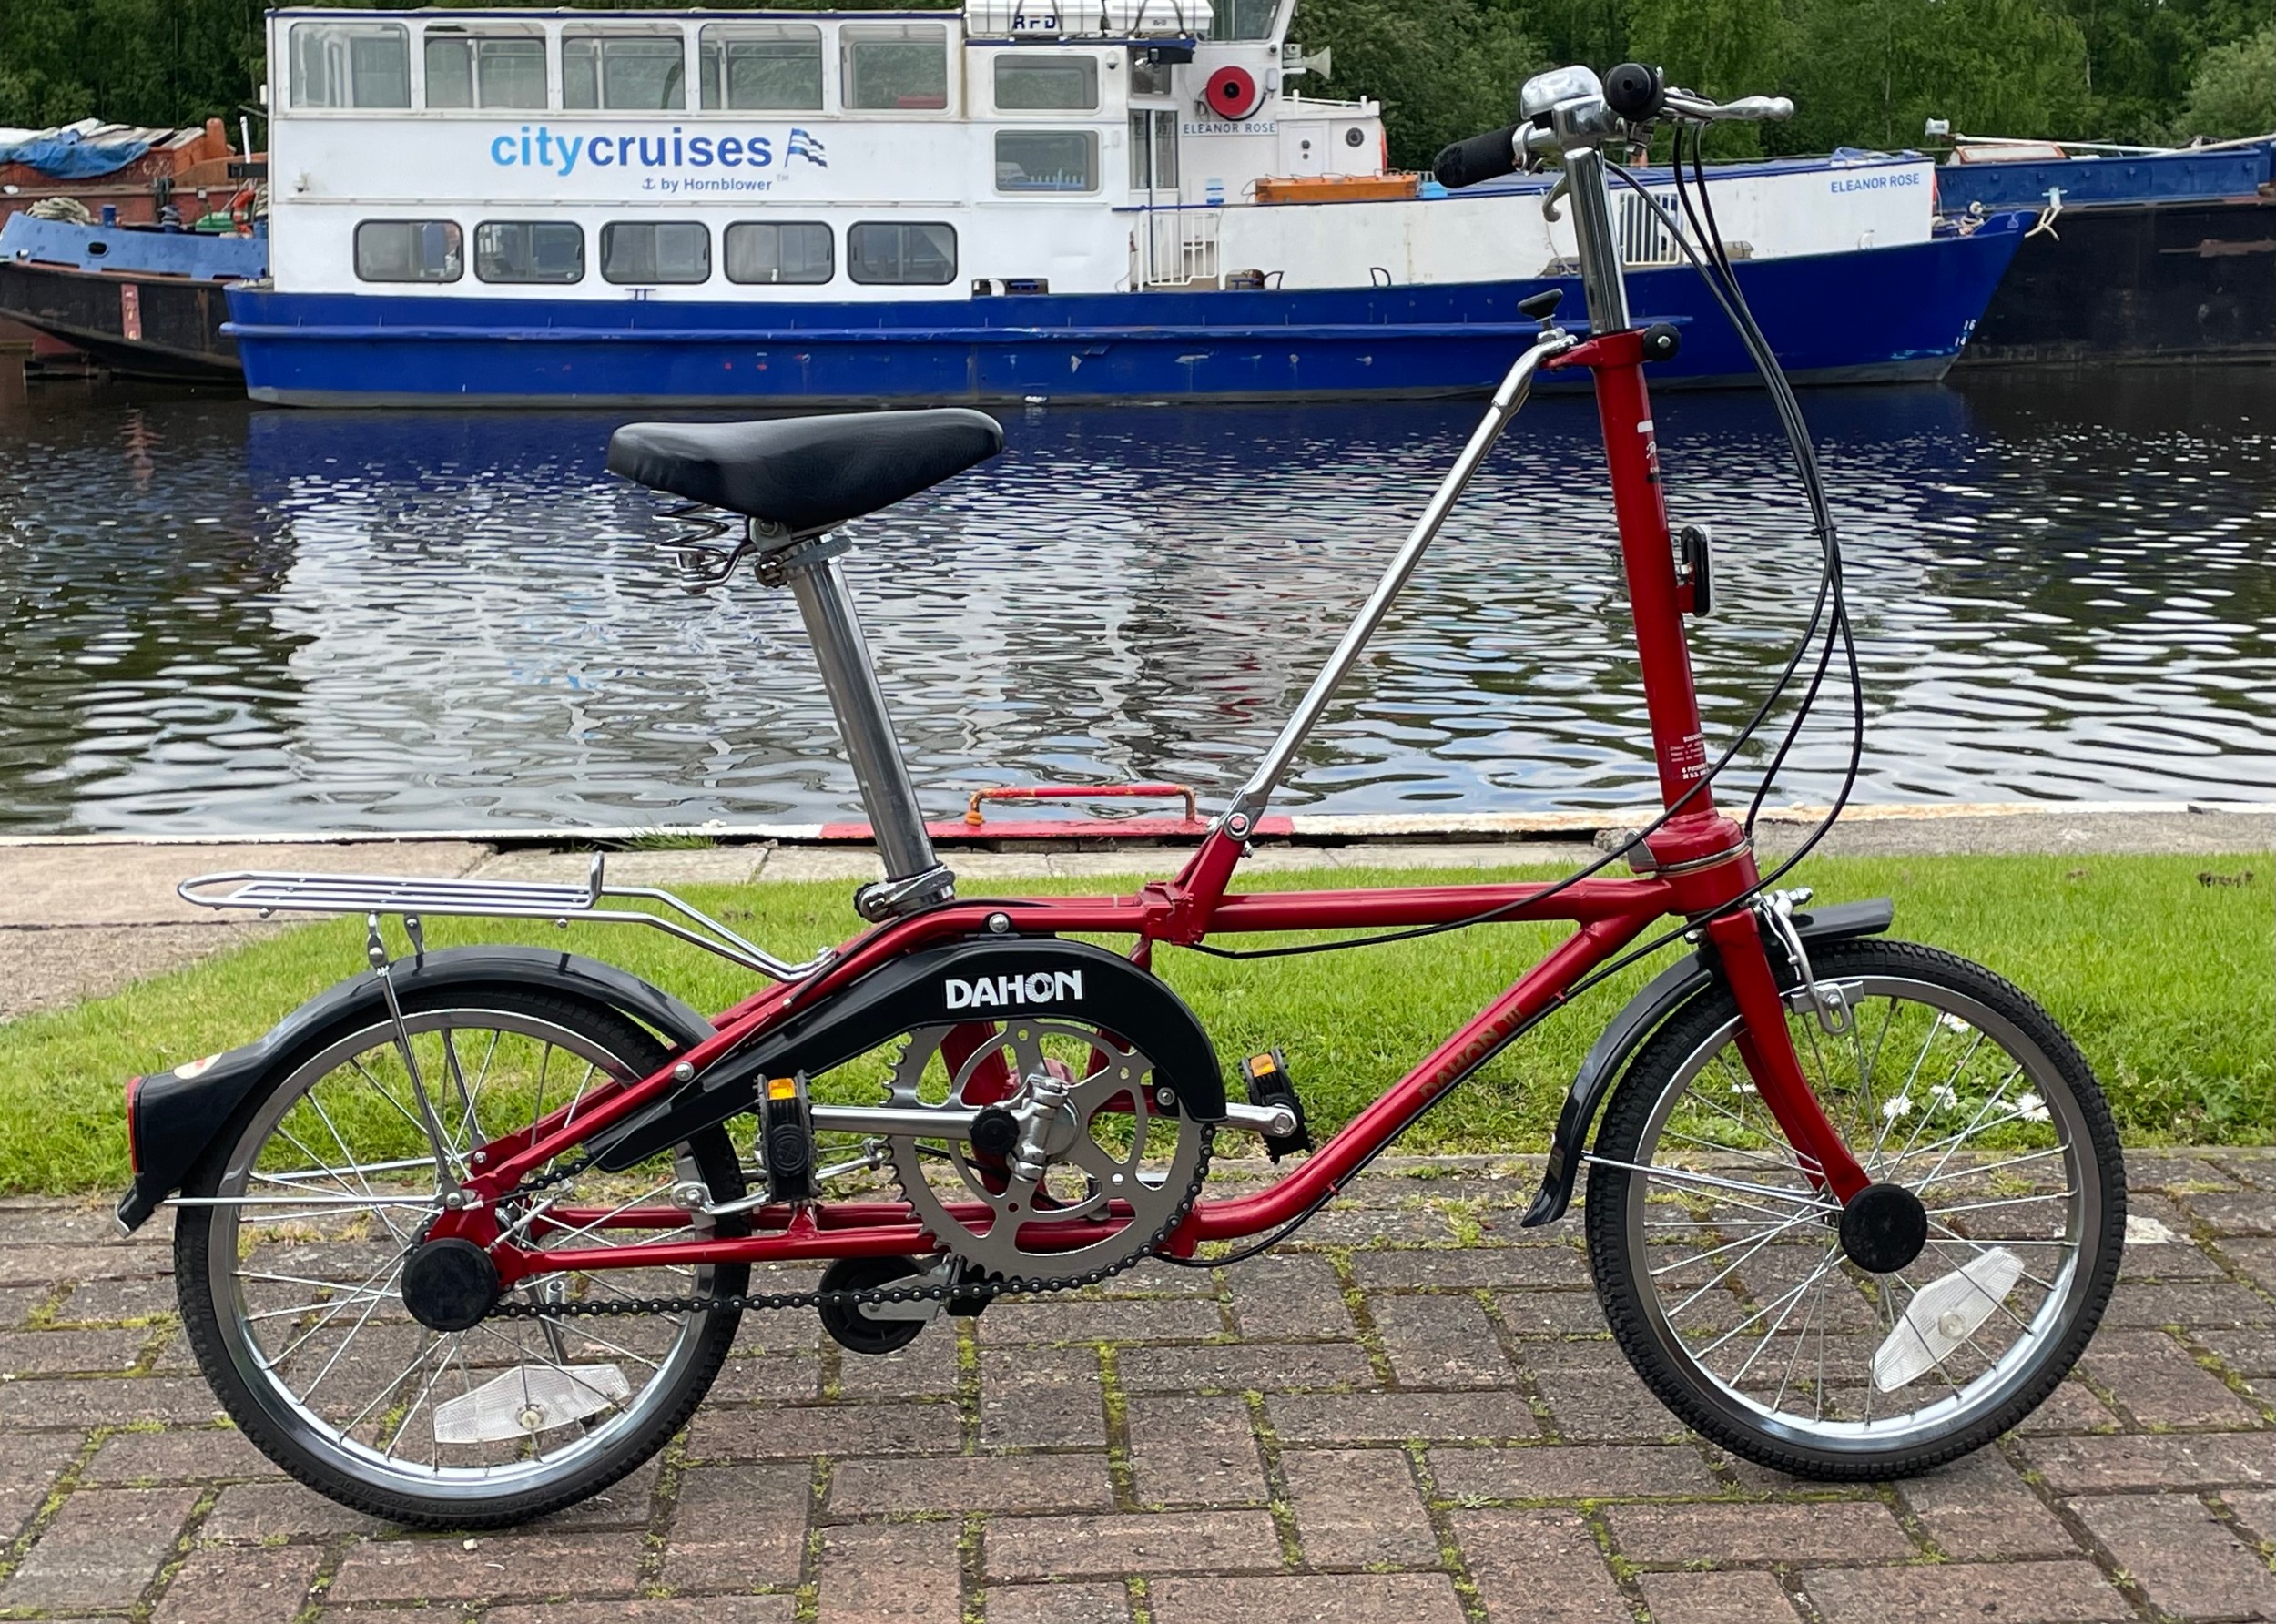 A Dahon folding bicycle, metallic red with carry case.